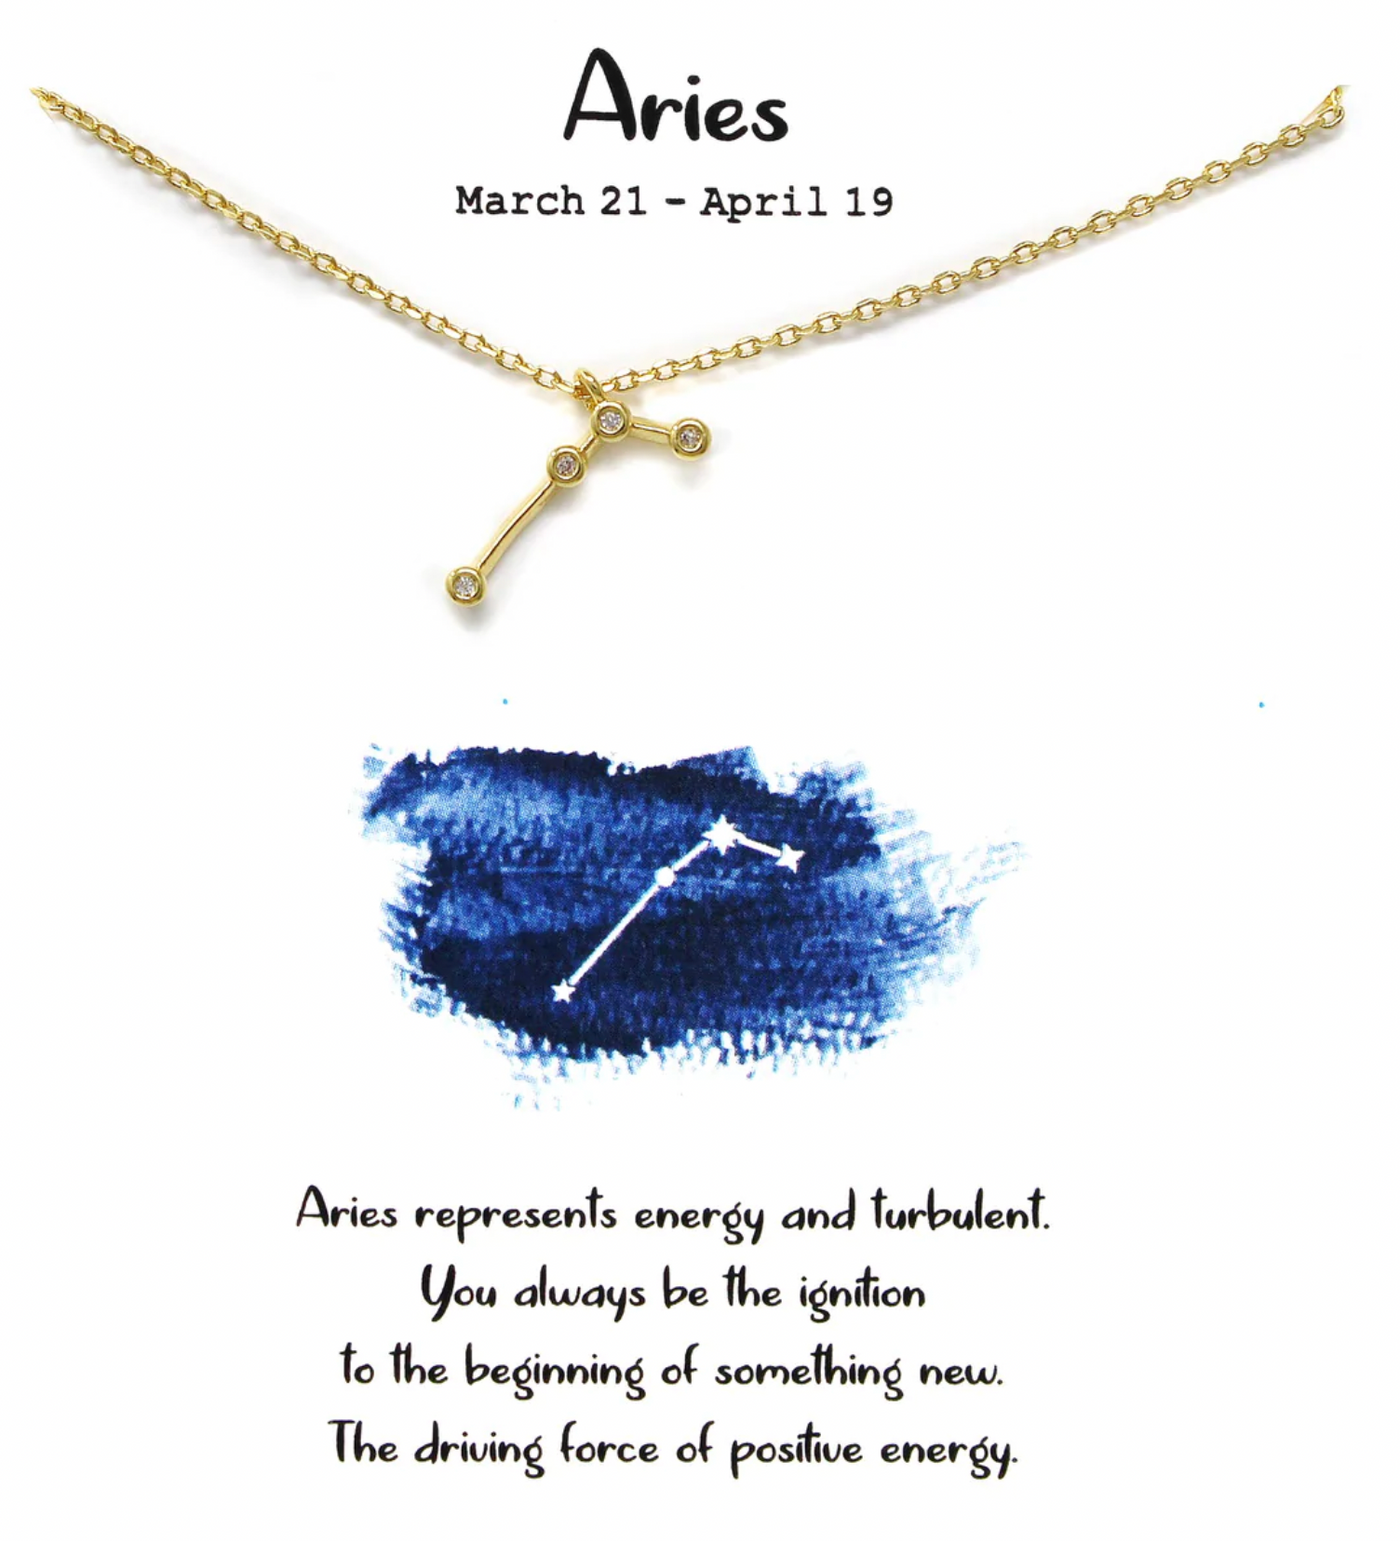 Aries Zodiac Sign Necklace March 21 - April 19